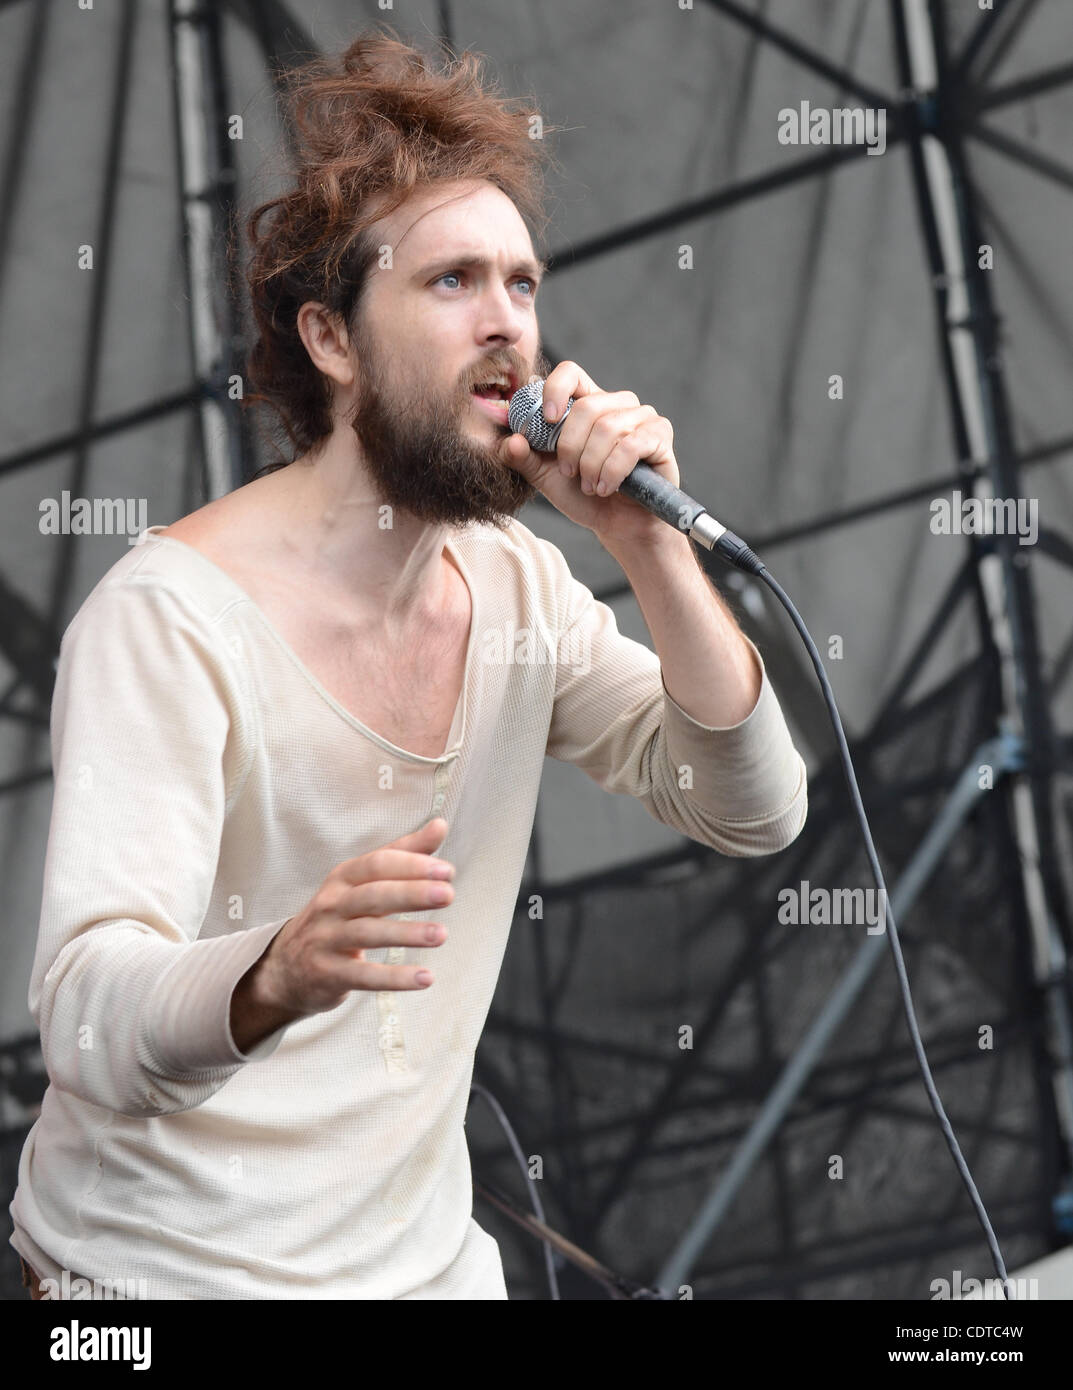 June 4, 2011 - Philadelphia, PA, USA - ALEX EBERT, lead singer of Edward  Sharpe and the Magnetic Zeros, performing at the 2011 Roots Picnic. The  roots Picnic is an annual music